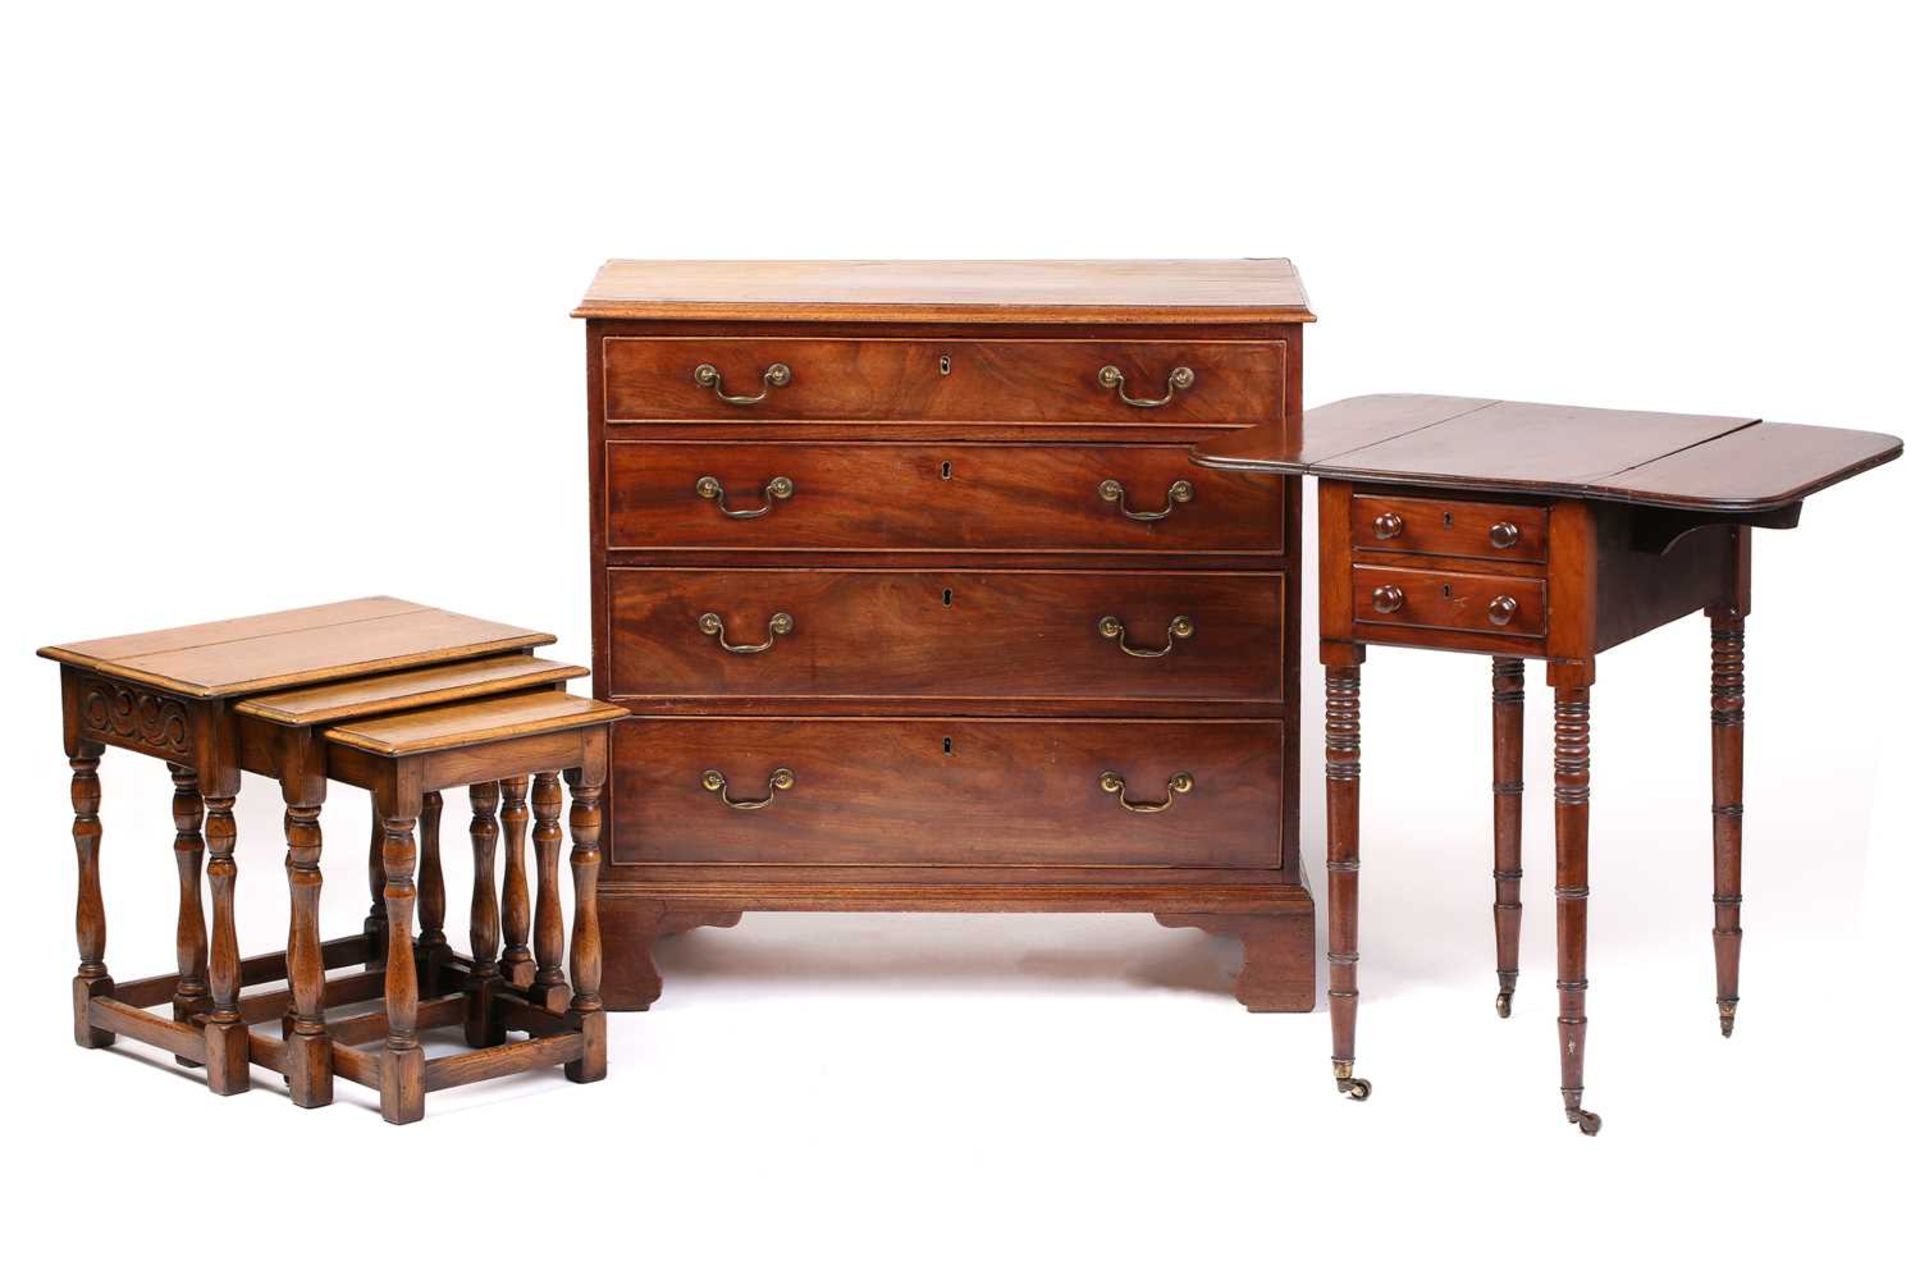 An early 19th-century mahogany and deal chest of four long drawers, 83 cm wide x 46 cm deep x 83